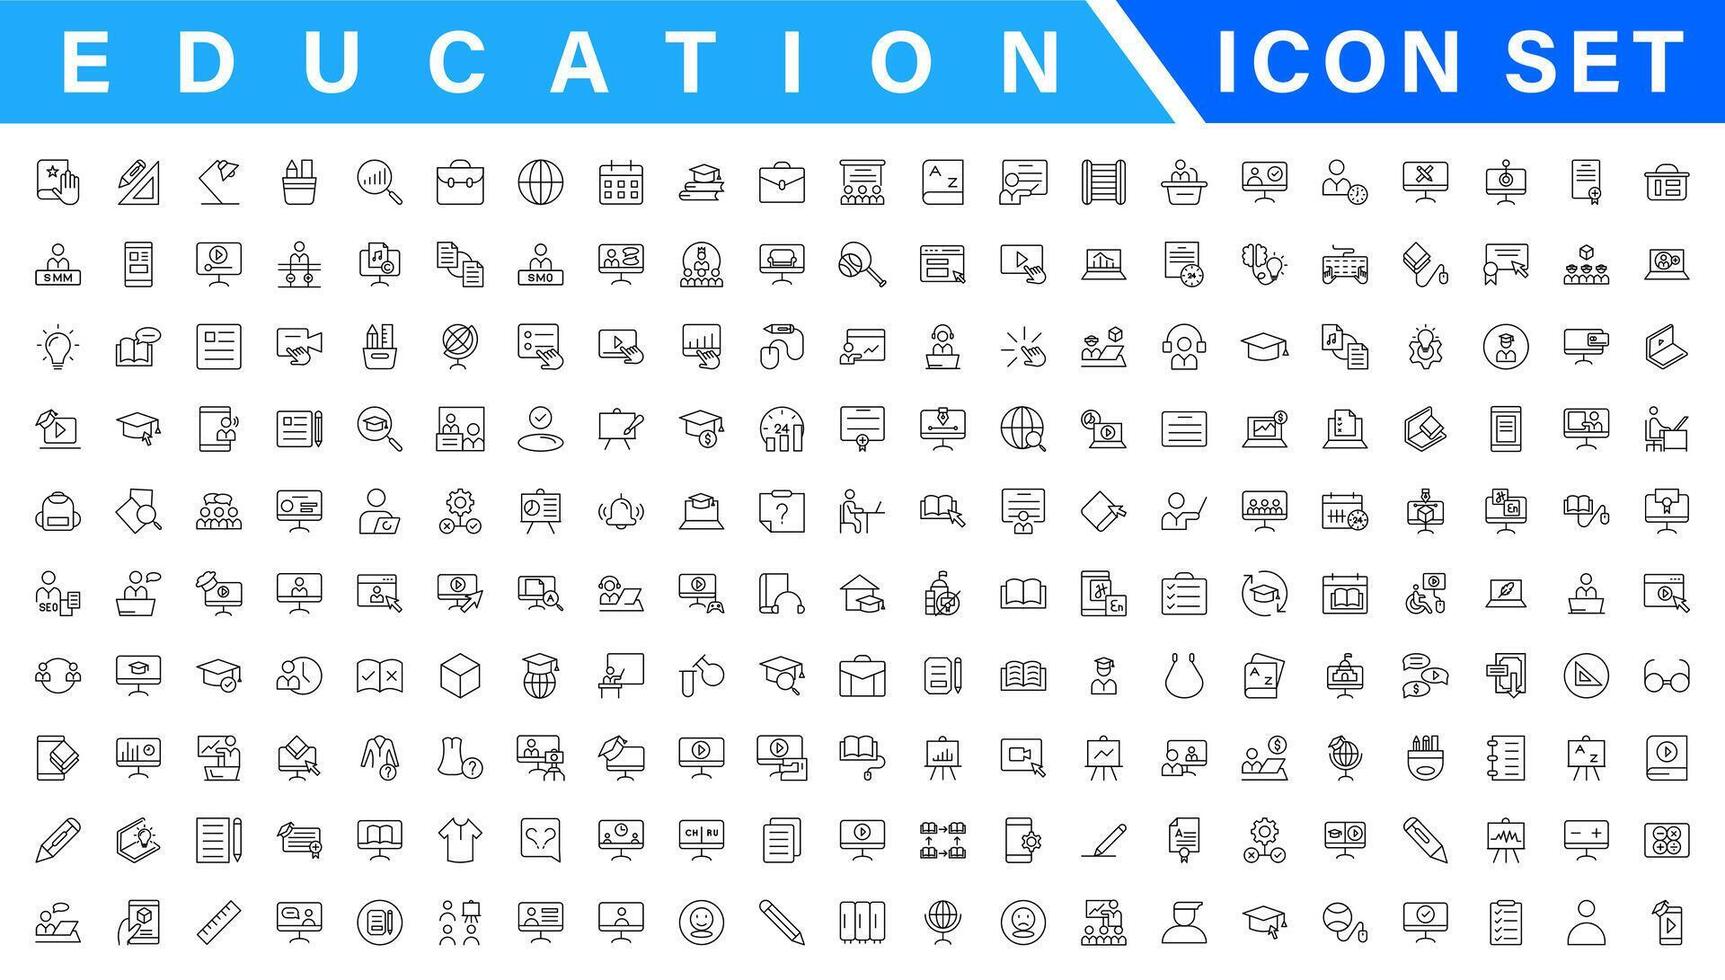 Education and Learning web icons in line style. School, university, textbook, learning. illustration. vector